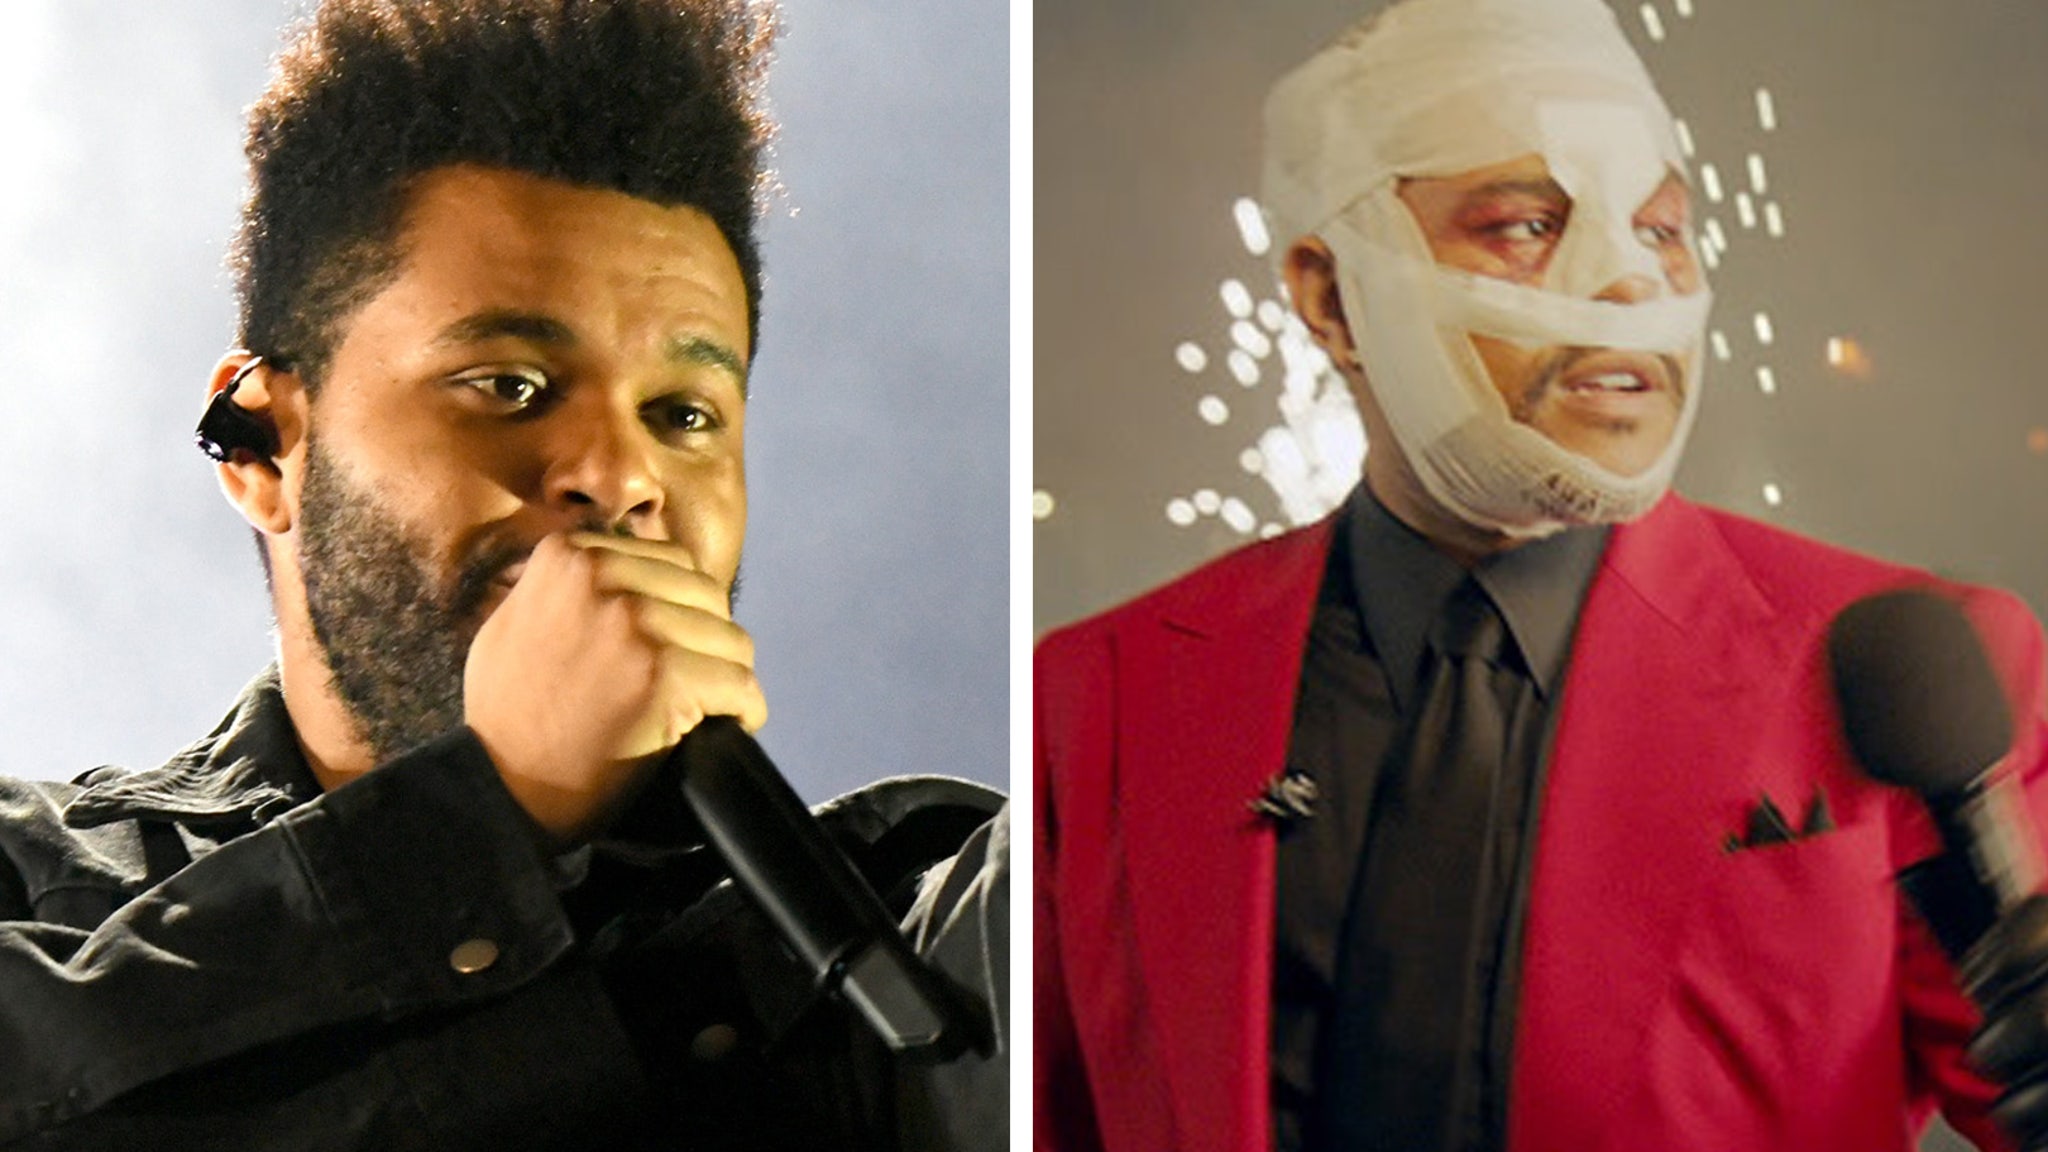 The Weeknd Explains Meaning Behind Face Bandages